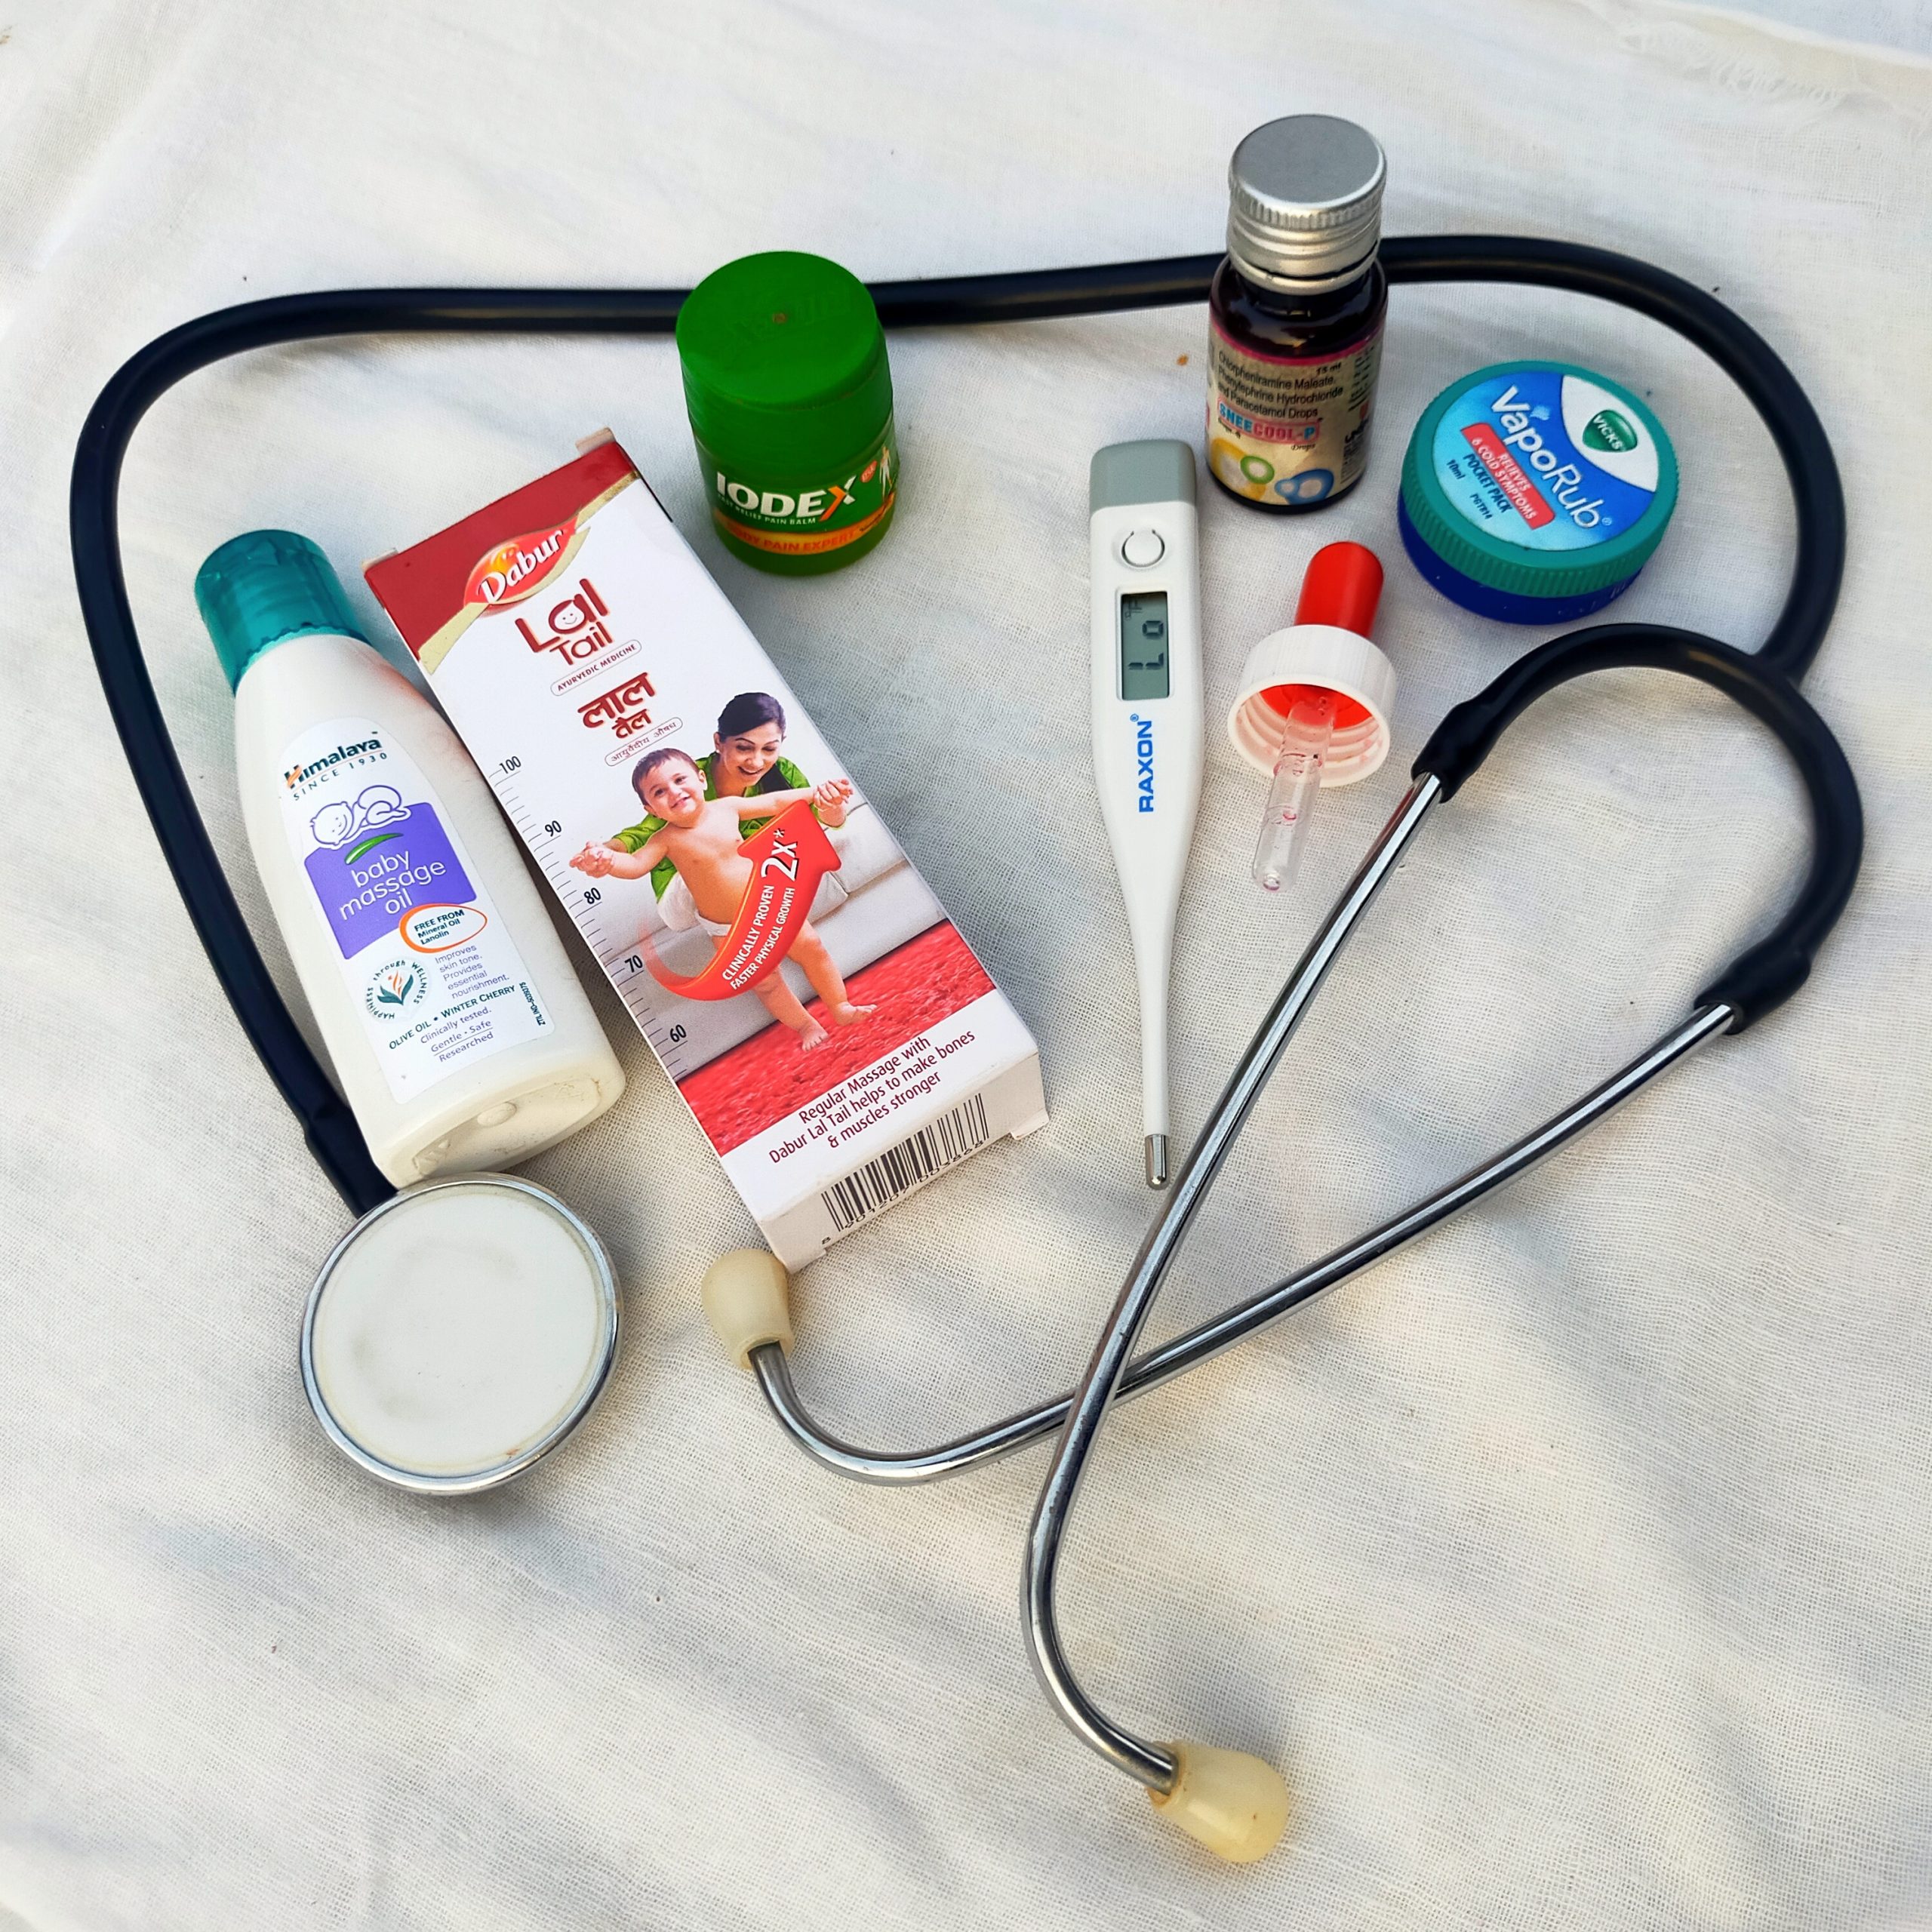 Stethoscope and medical products